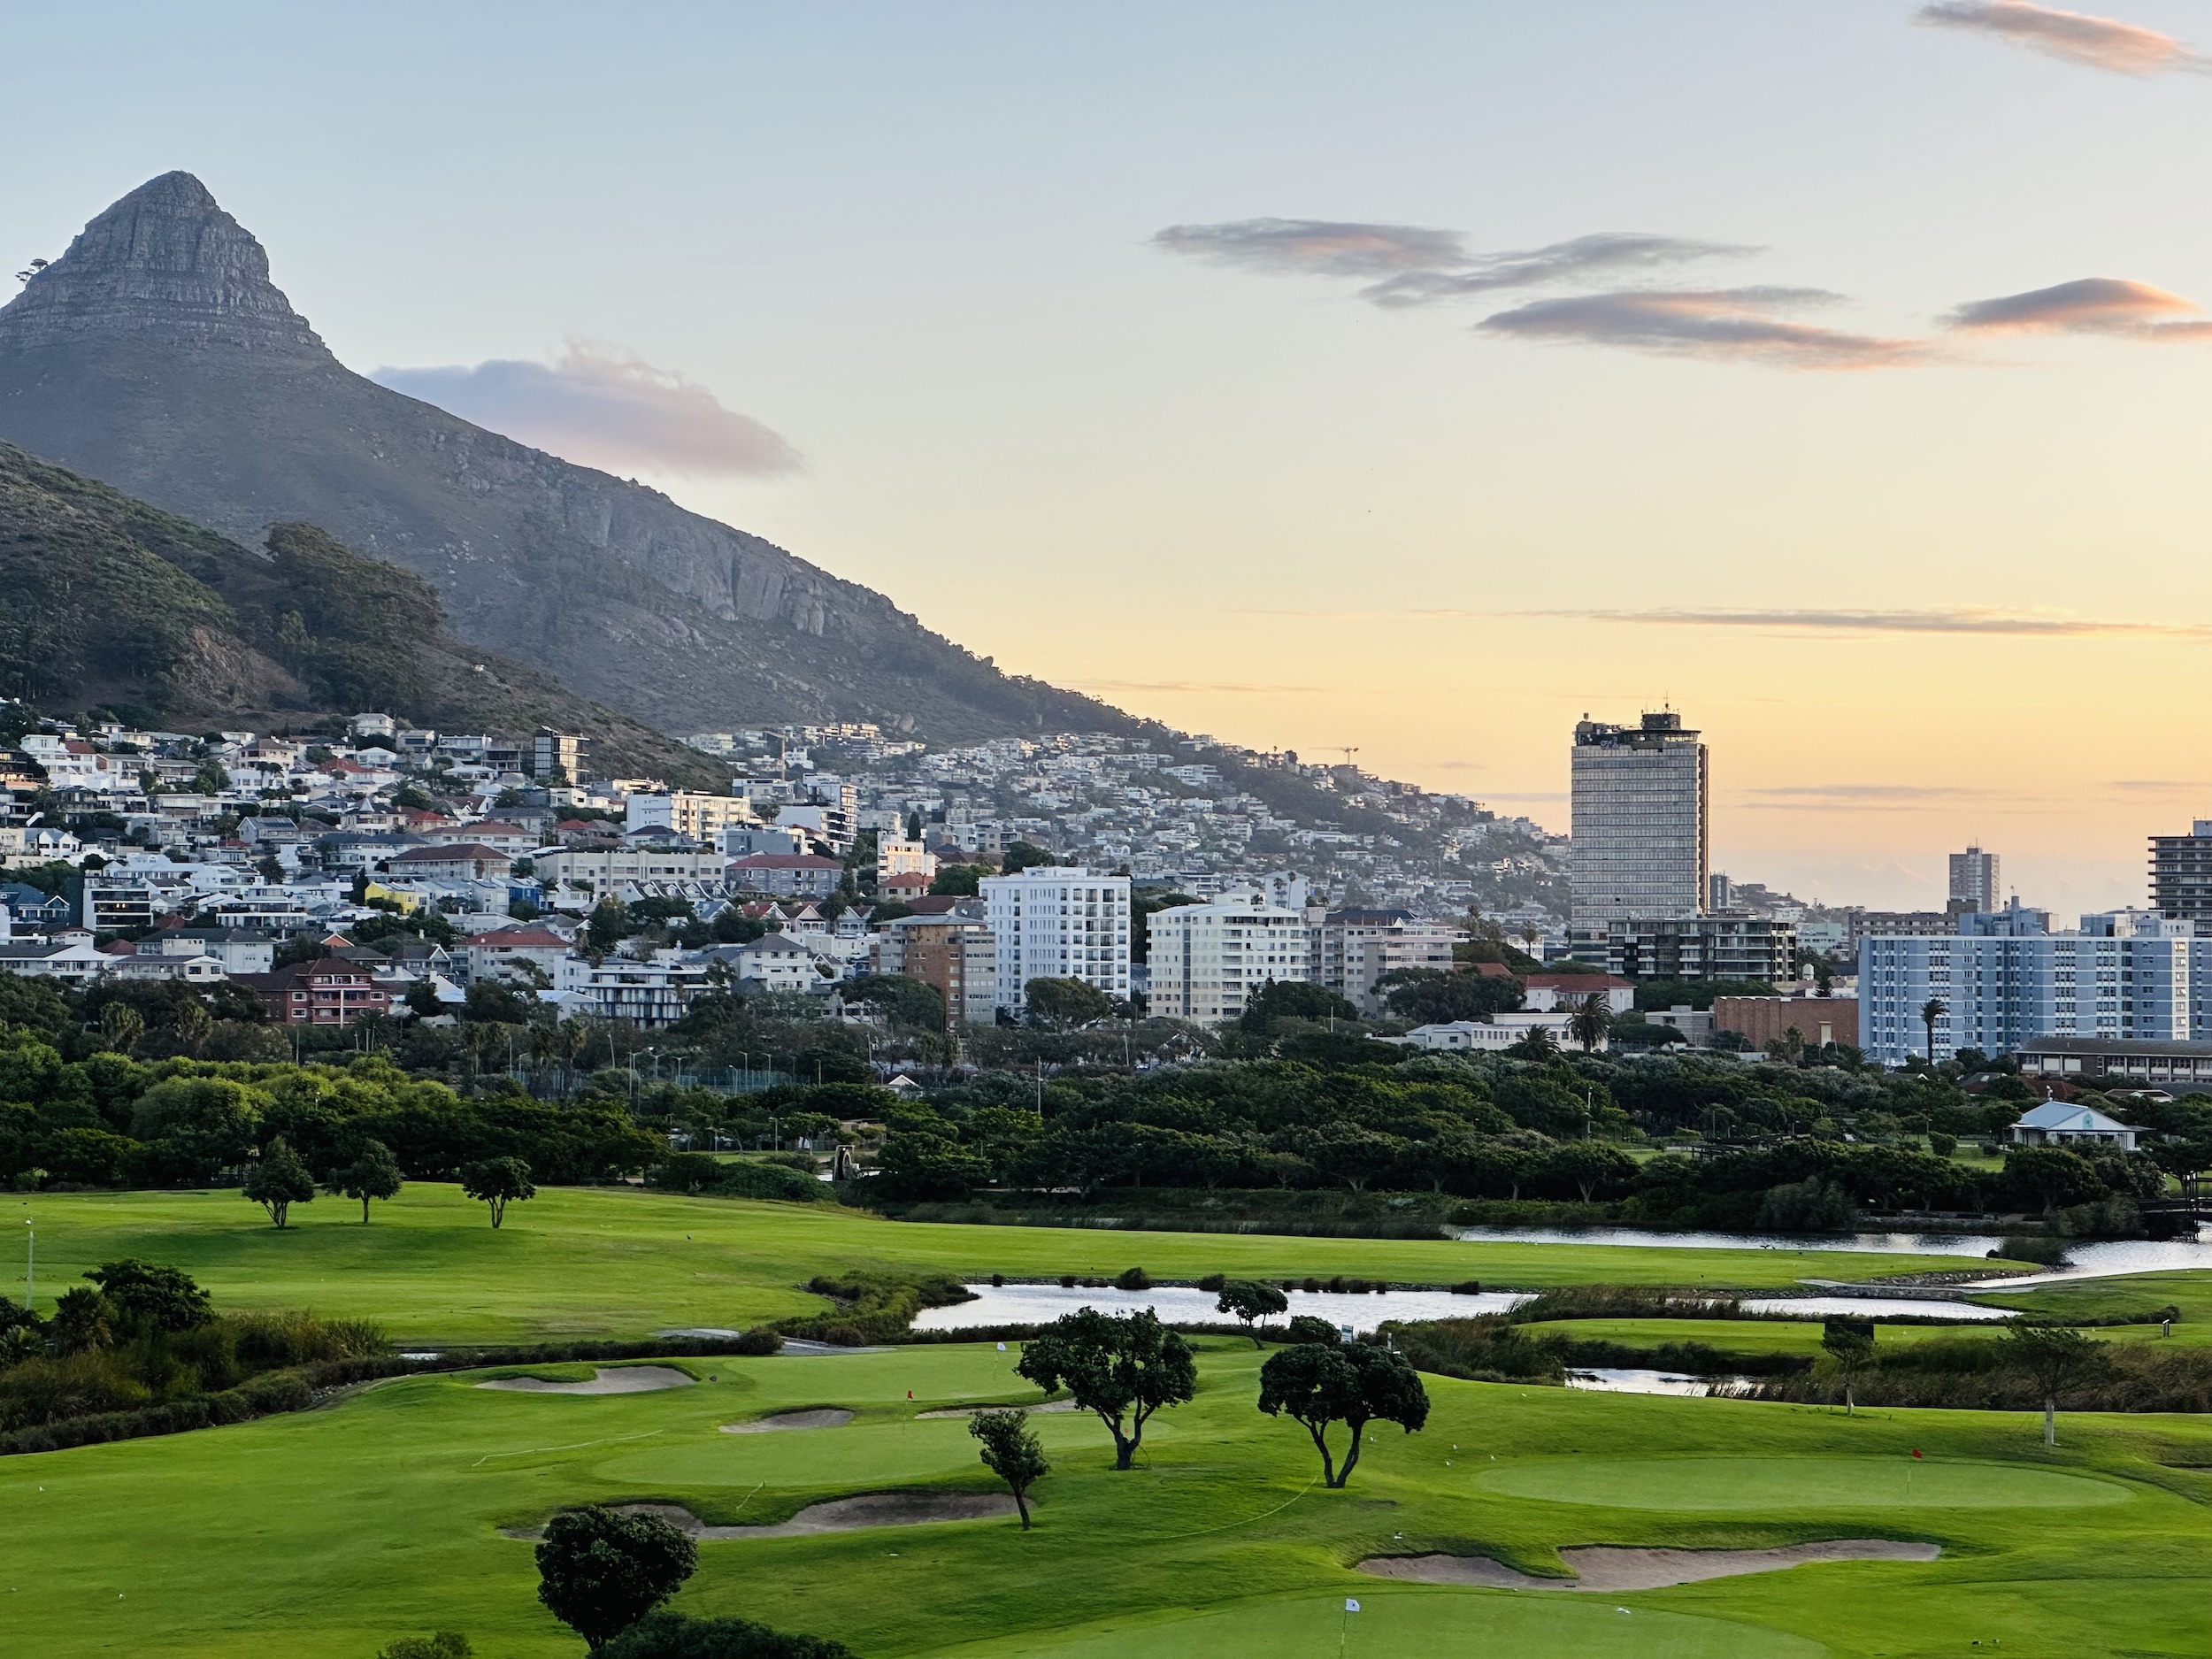 50 Fun Things To Do In Cape Town For Young Adults!